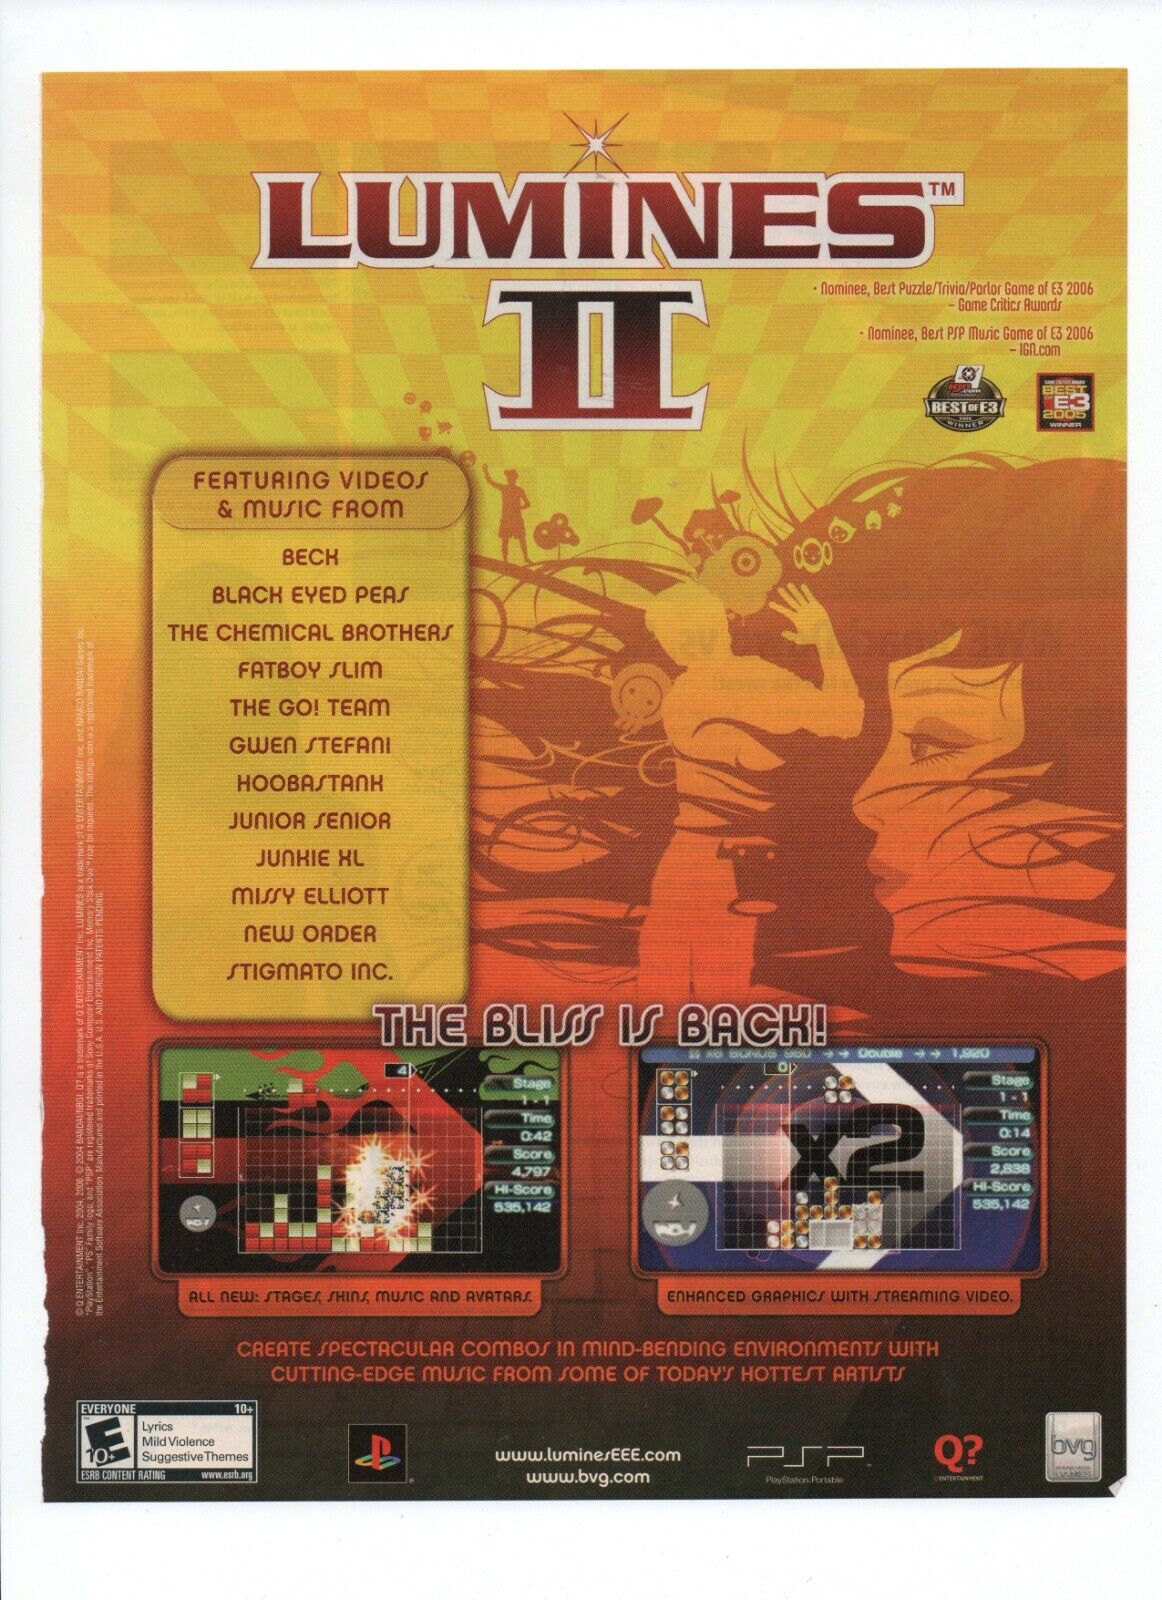 Lumines II Sony PSP The Bliss Is Back Videos & Music - 2006 Video Game Print Ad